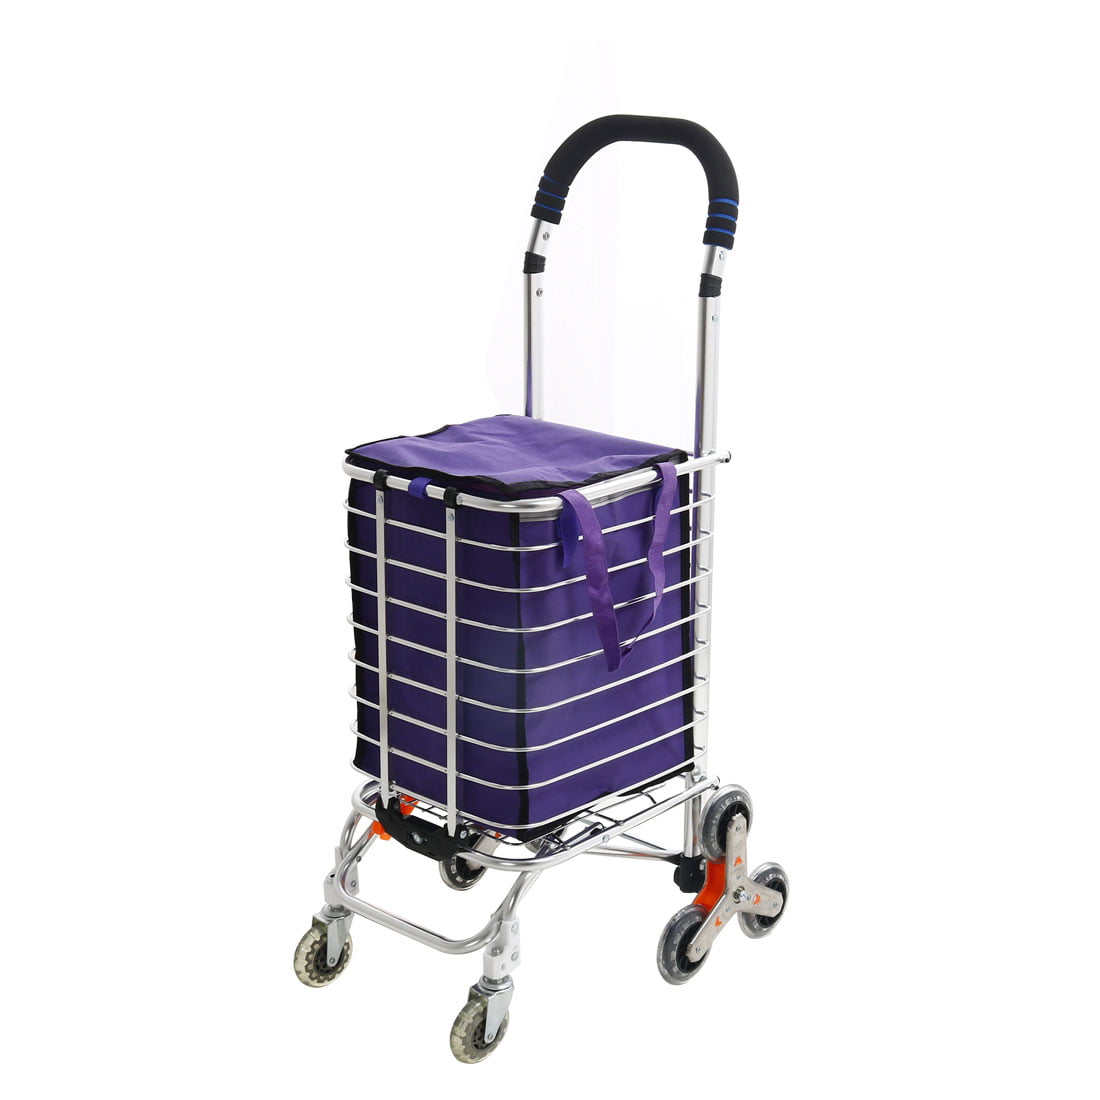 NDDDSD Shopping Cart Small Cart Folding Carts Portable Carts Household Climbing Stairs Shopping Carts for The Elderly Rolling Bag Cart Color : A 